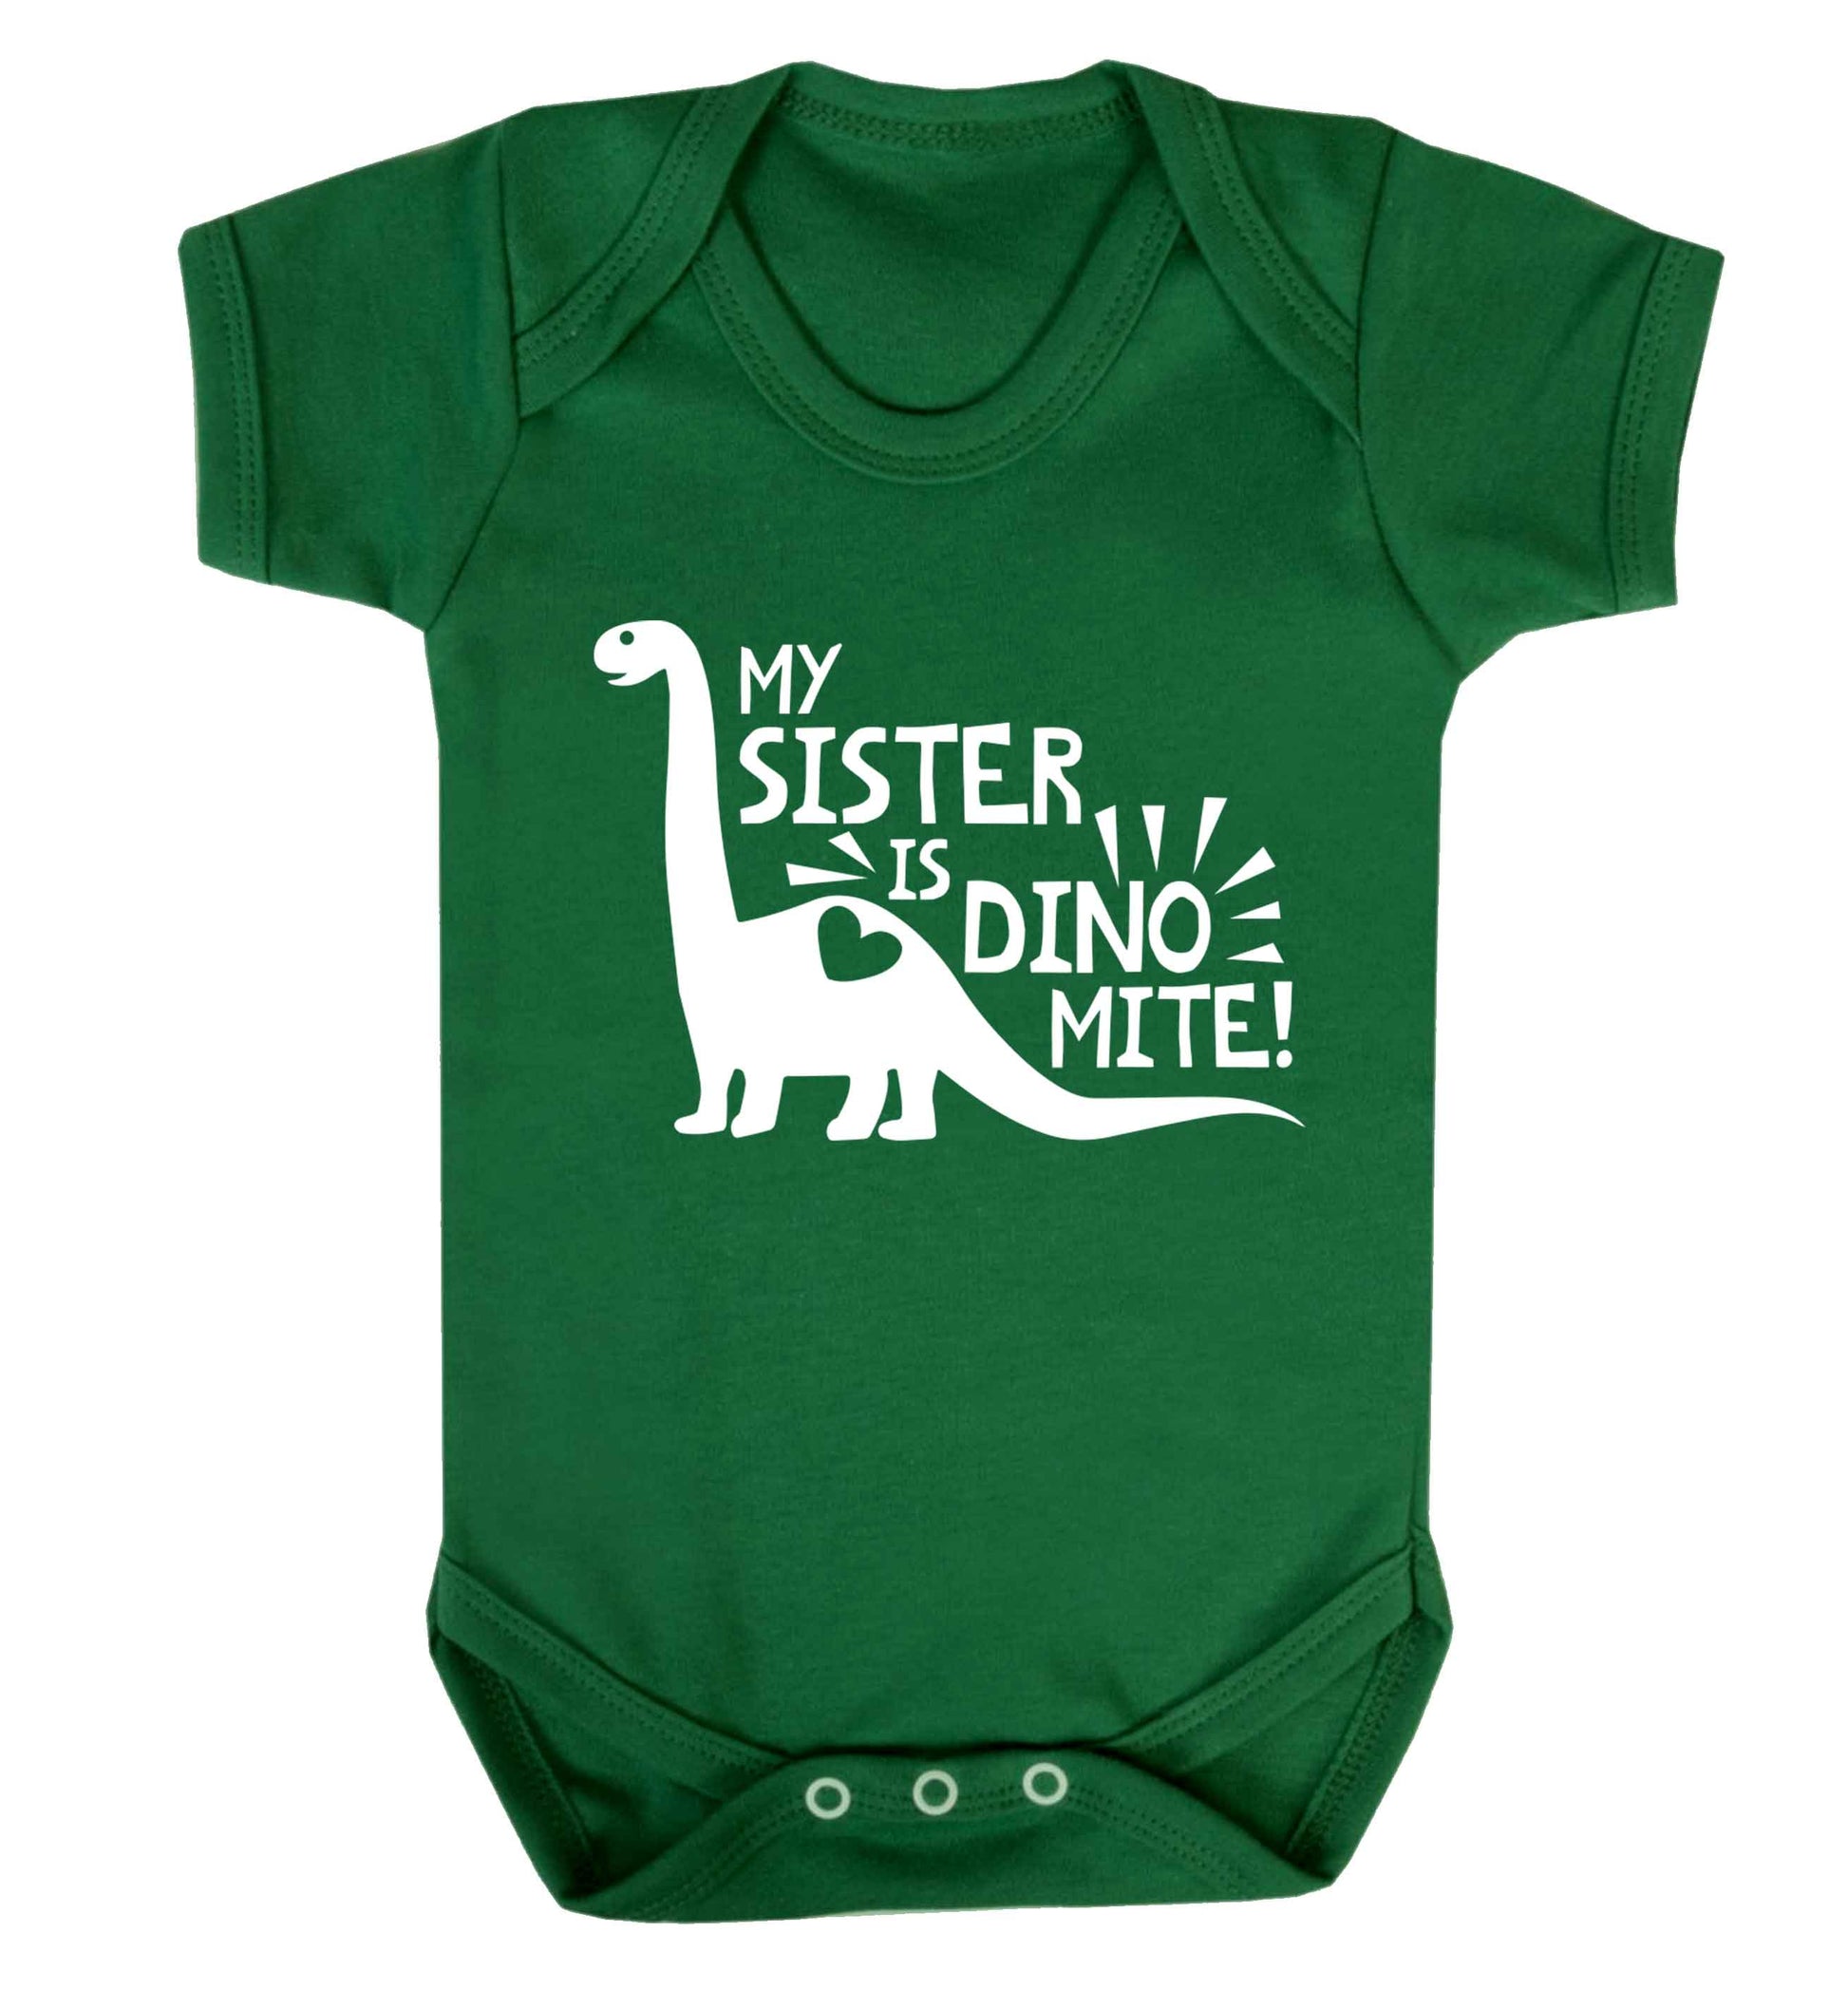 My sister is dinomite! Baby Vest green 18-24 months